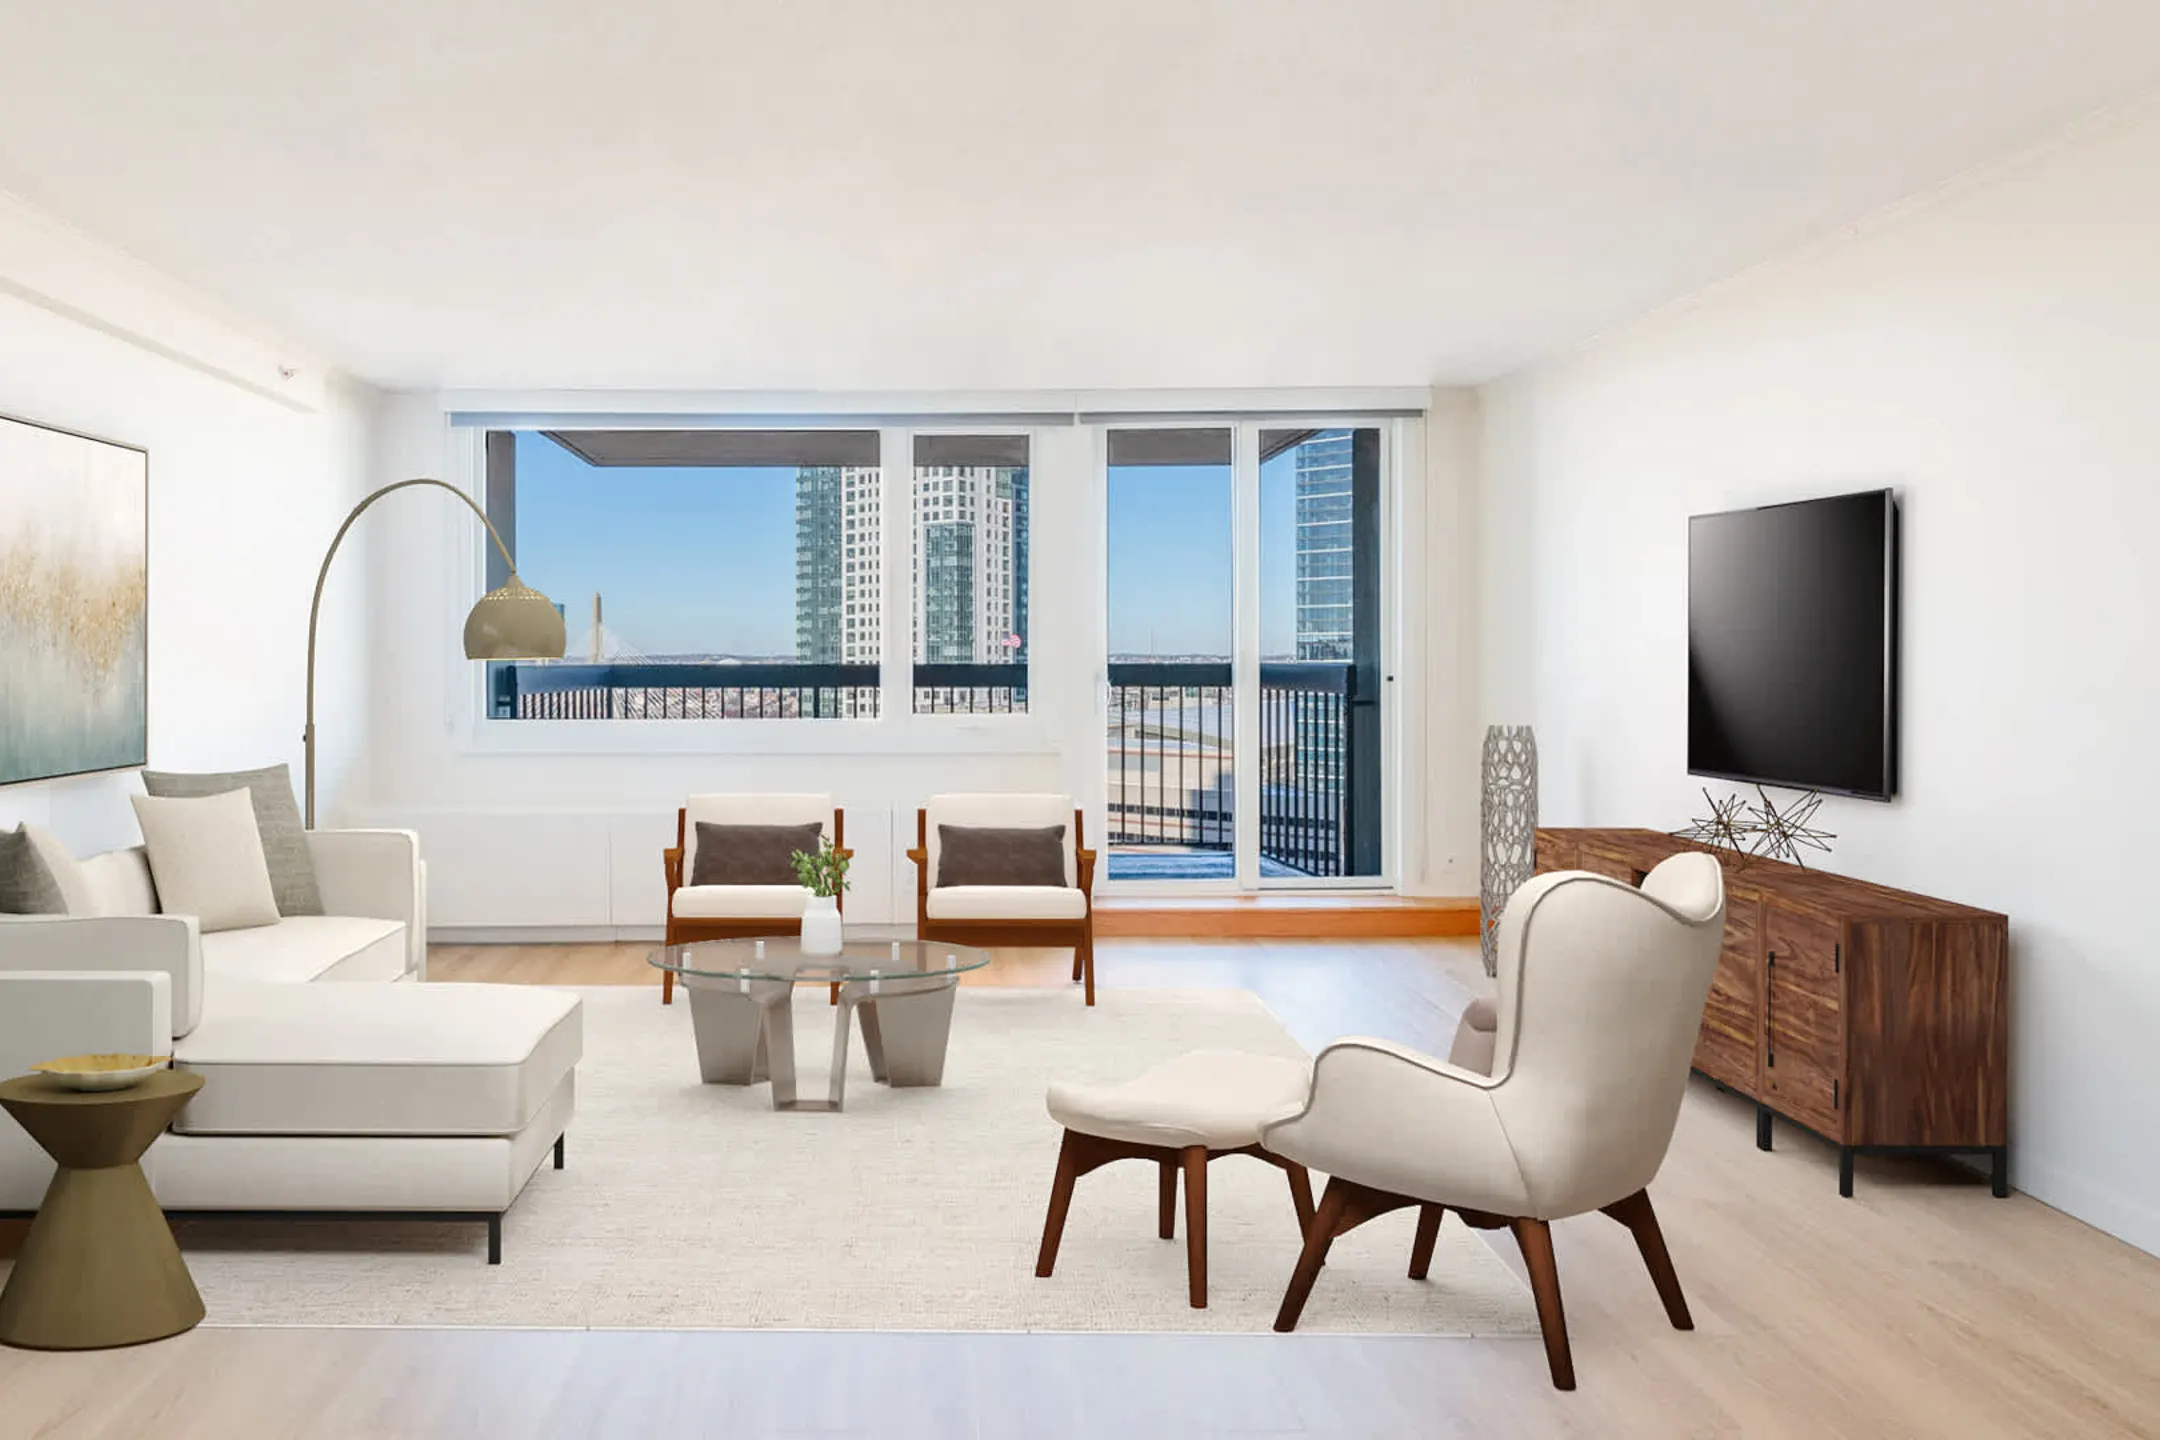 Living Room - The Towers at Longfellow - Boston, MA